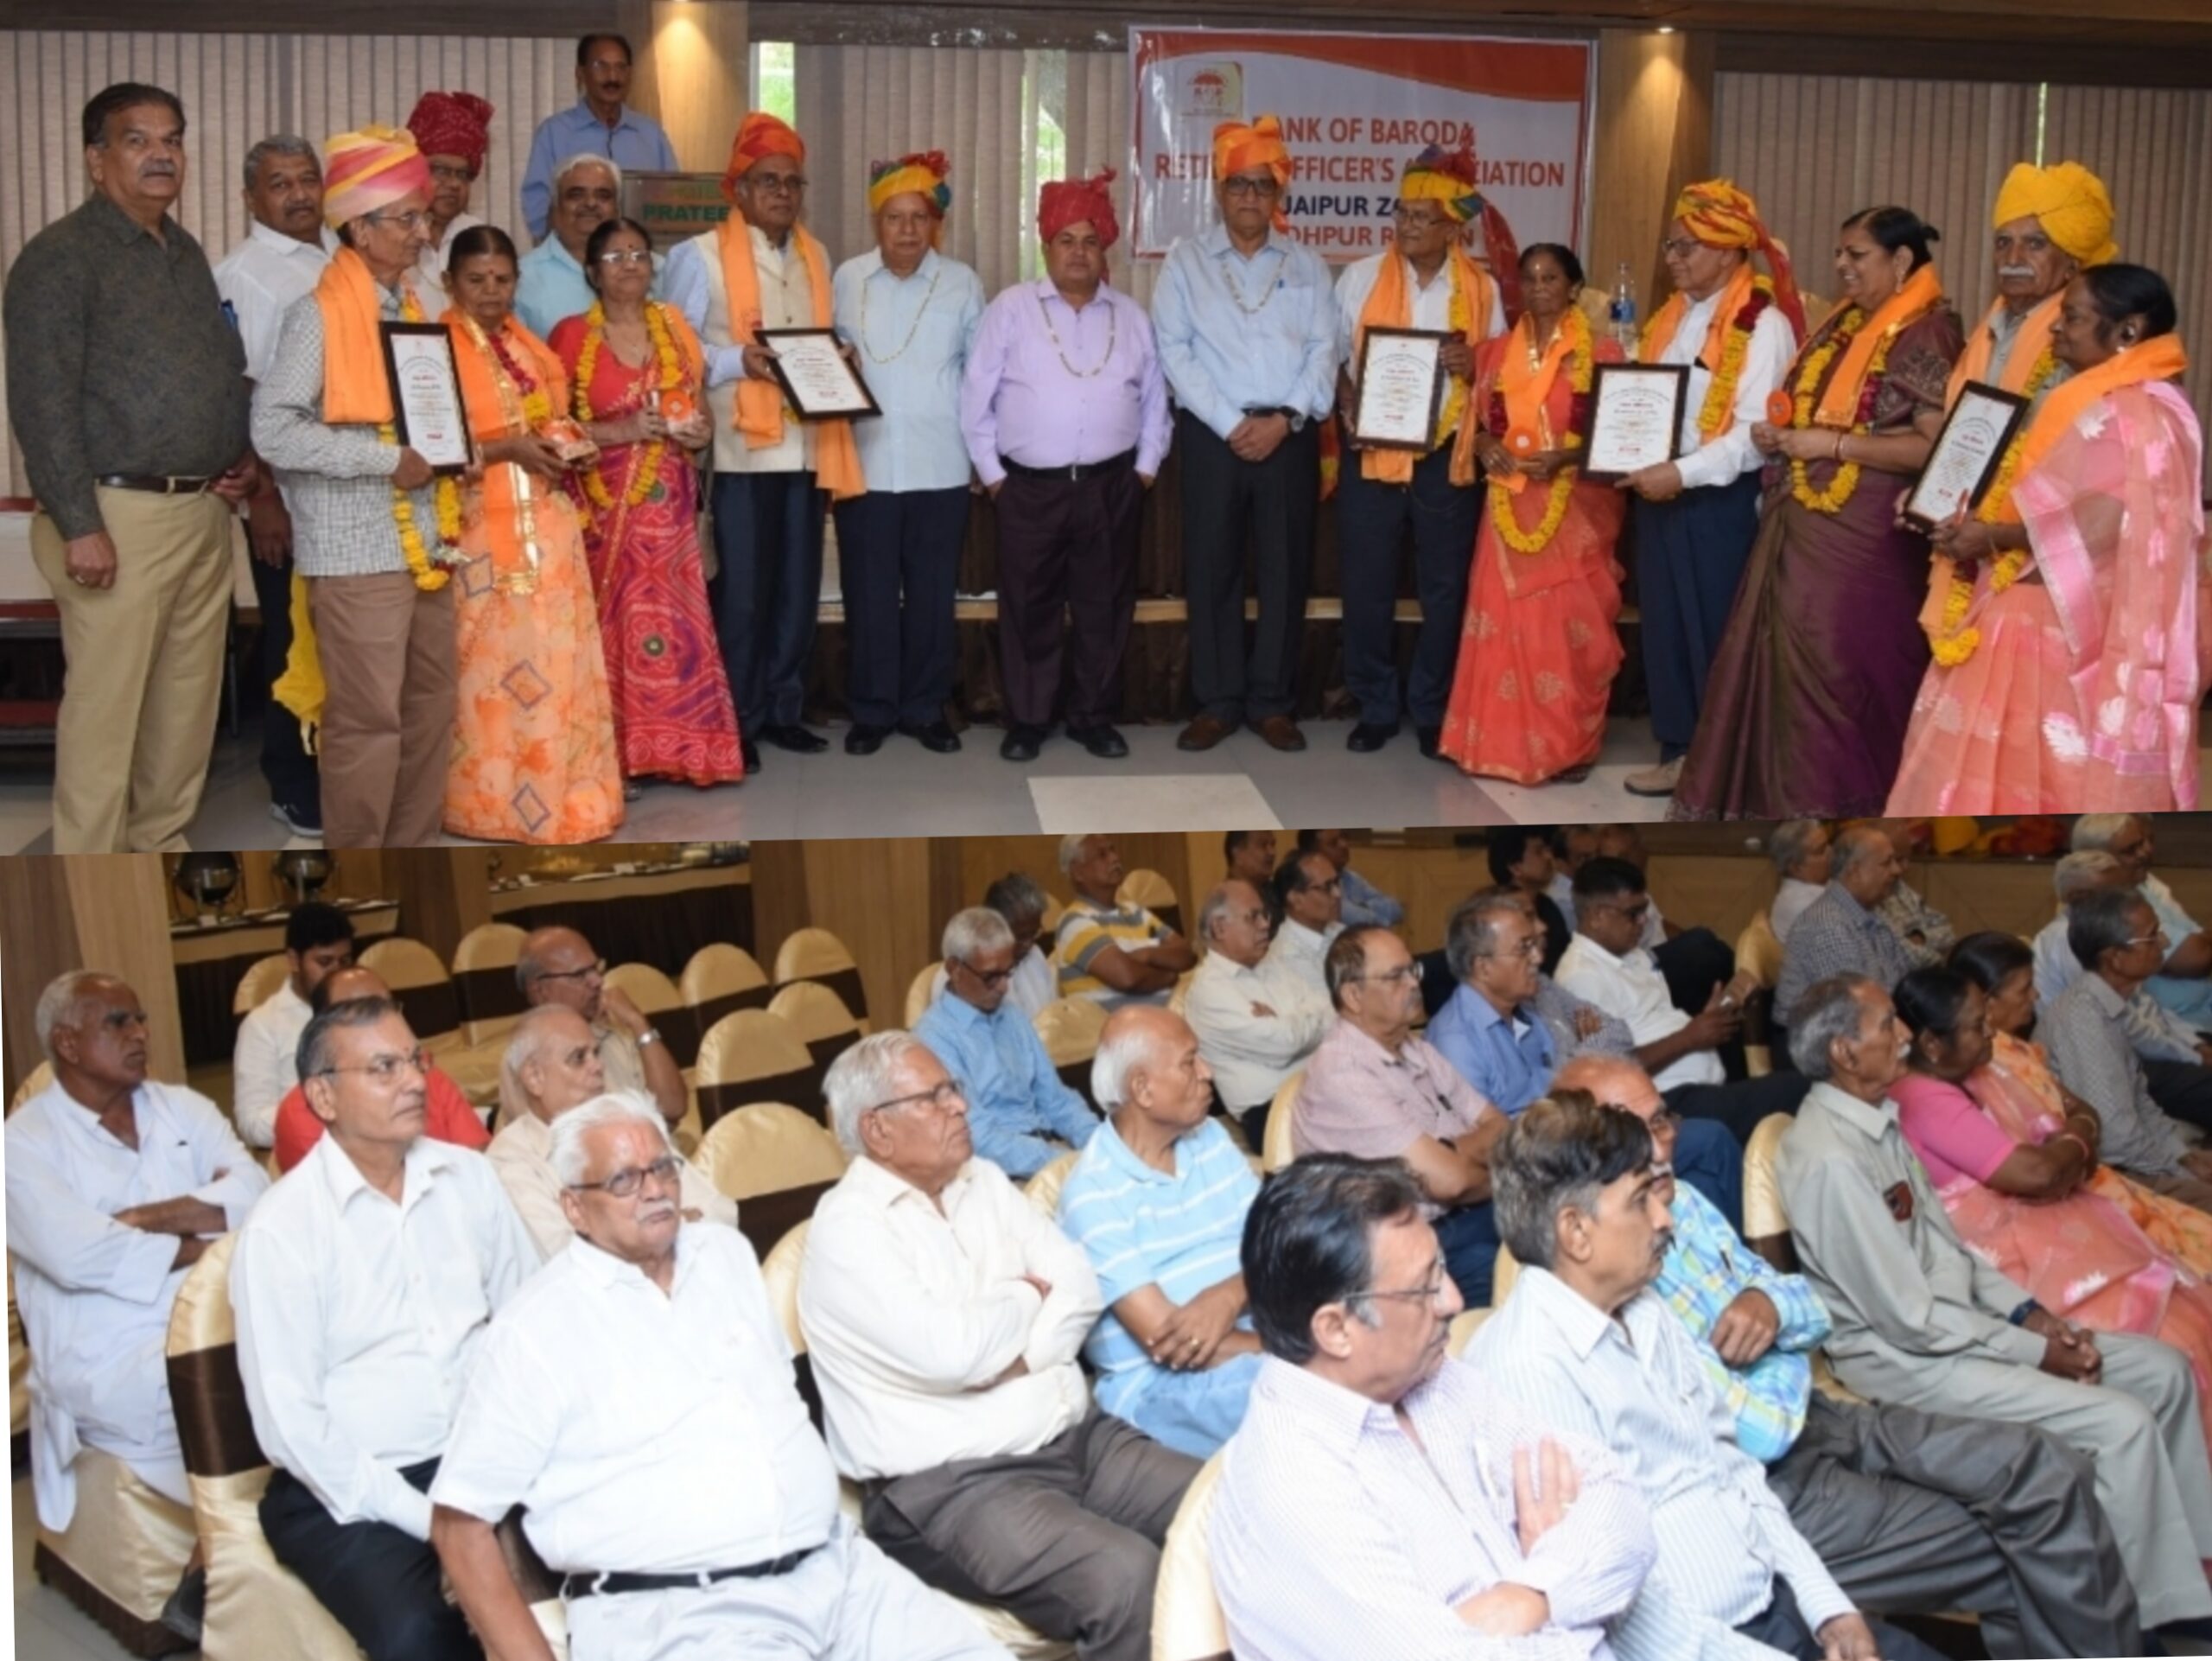 bank-of-baroda-retired-officers-association-meeting-concluded